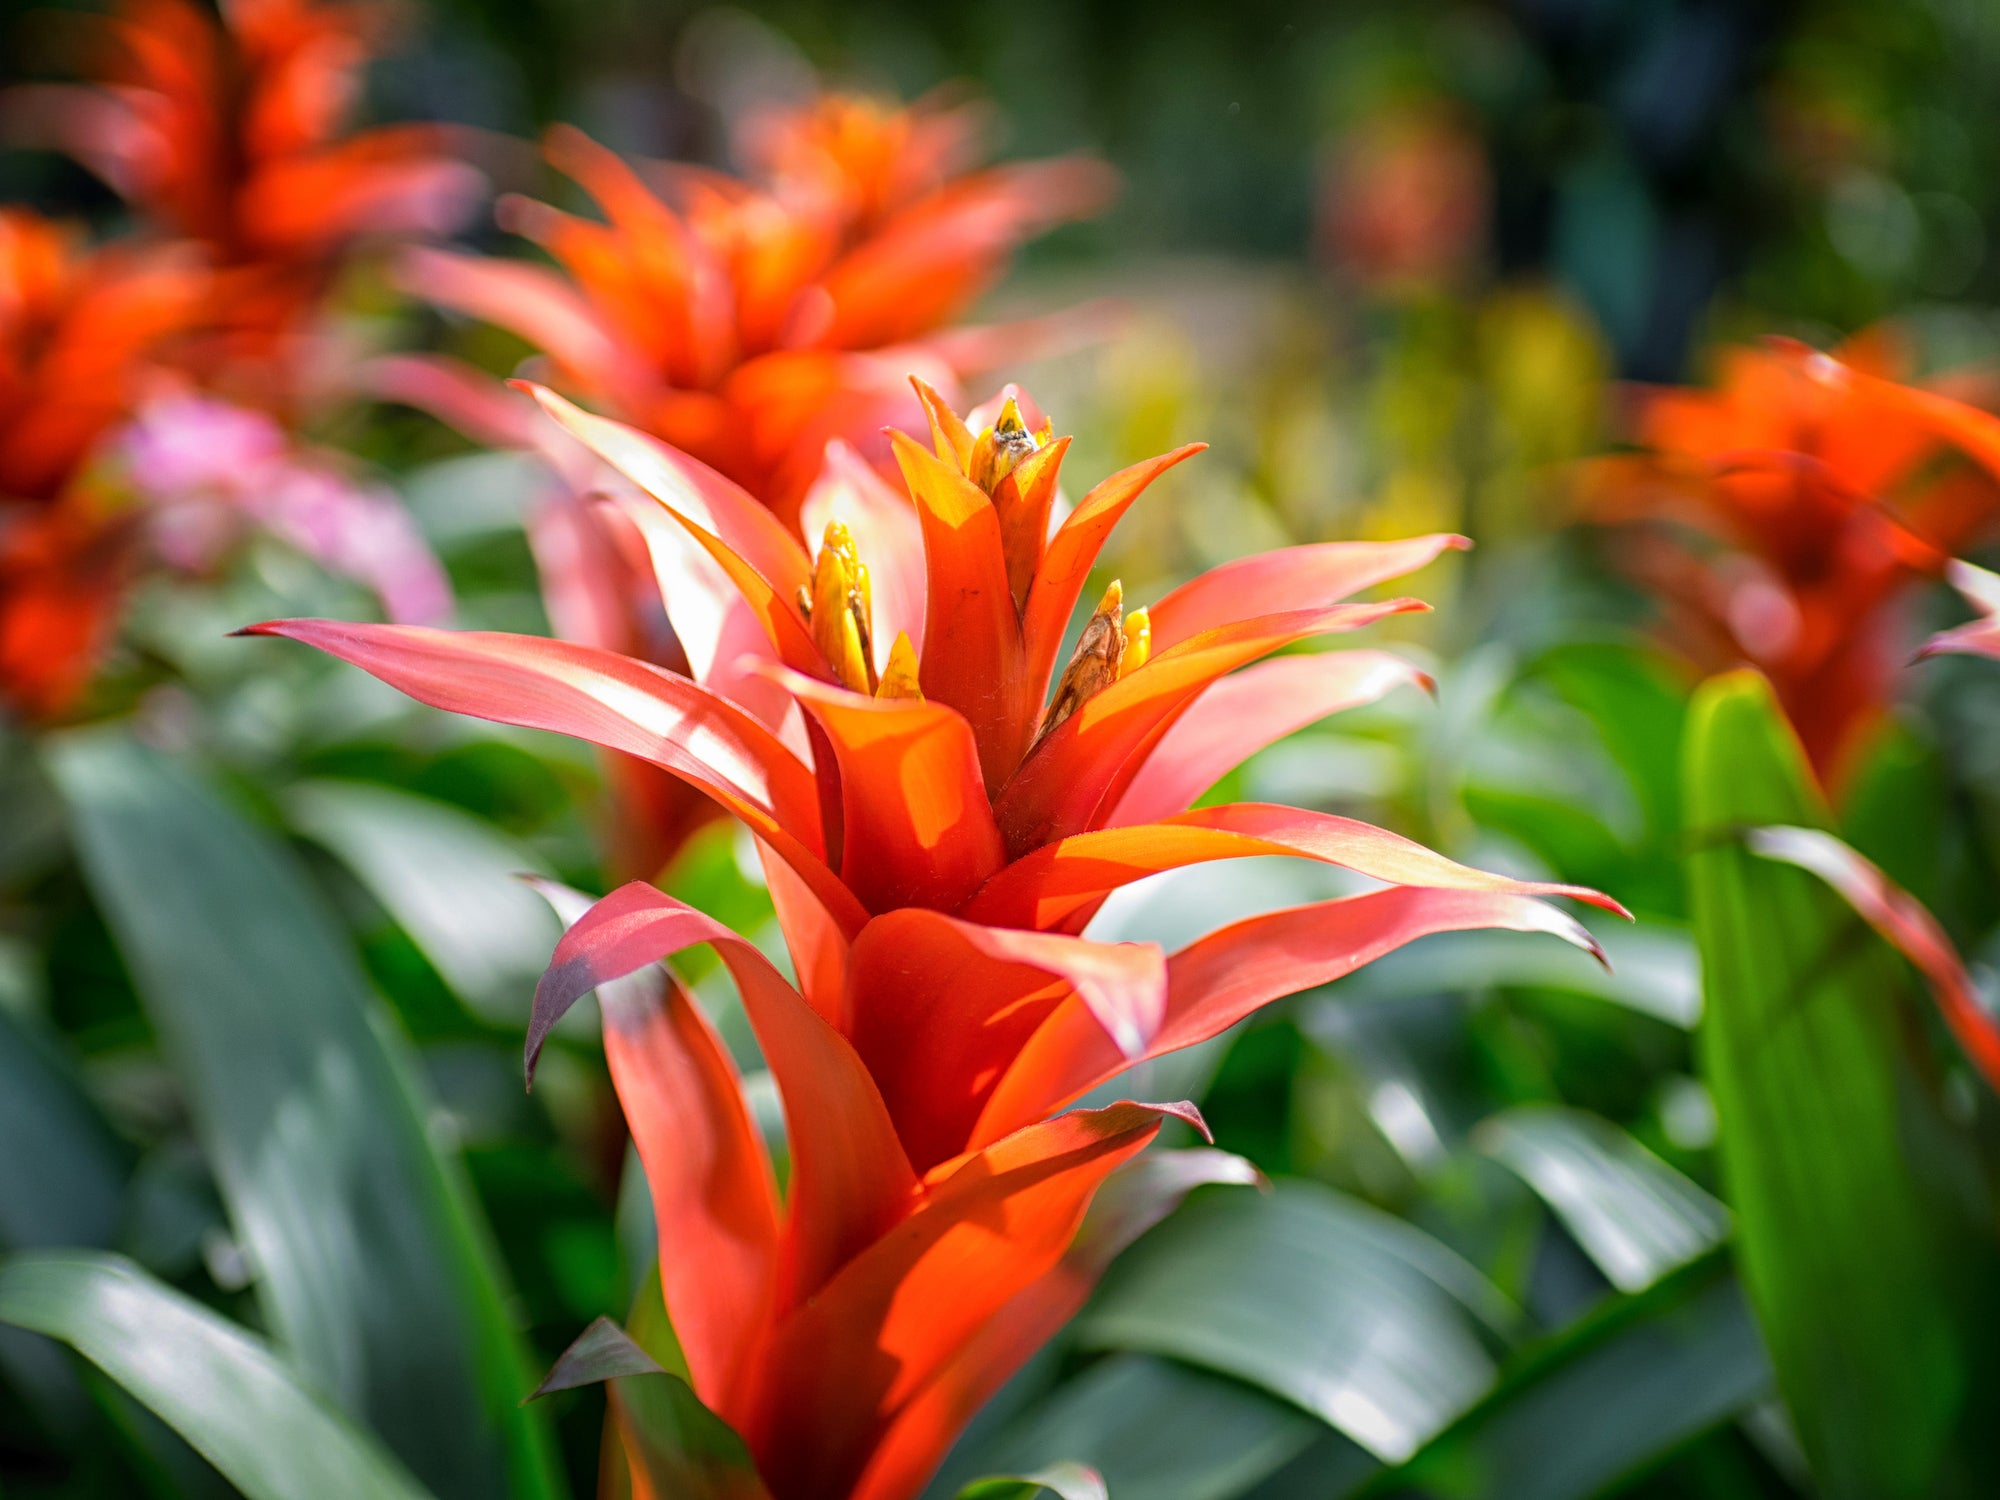 Caring for Your Bromeliad